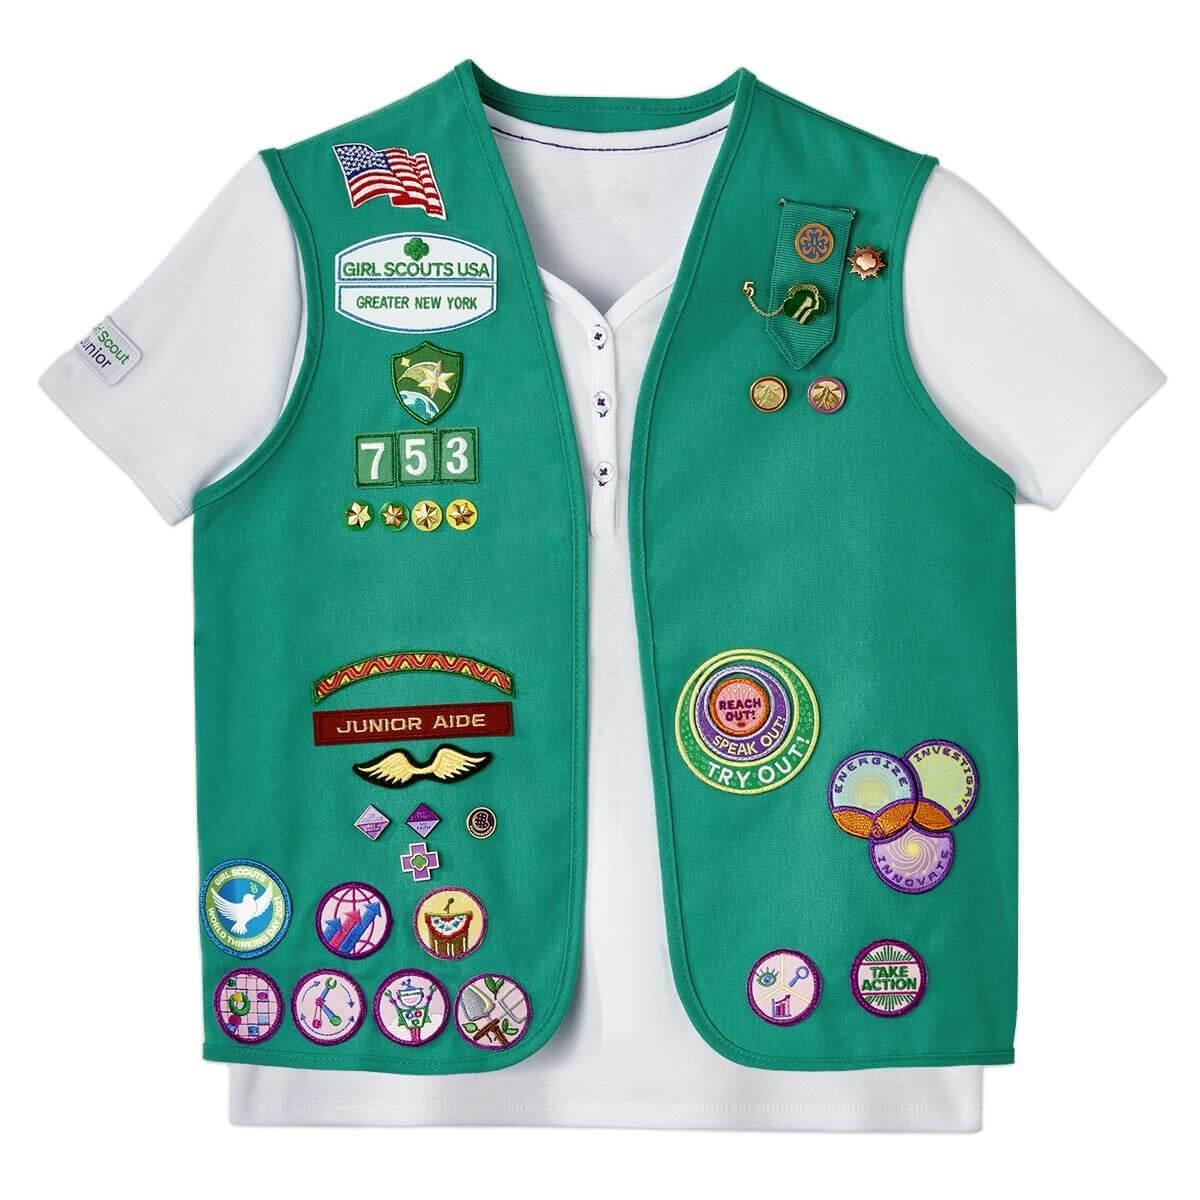 Gs junior vest badge placement investing in stocks for beginners philippines postal code